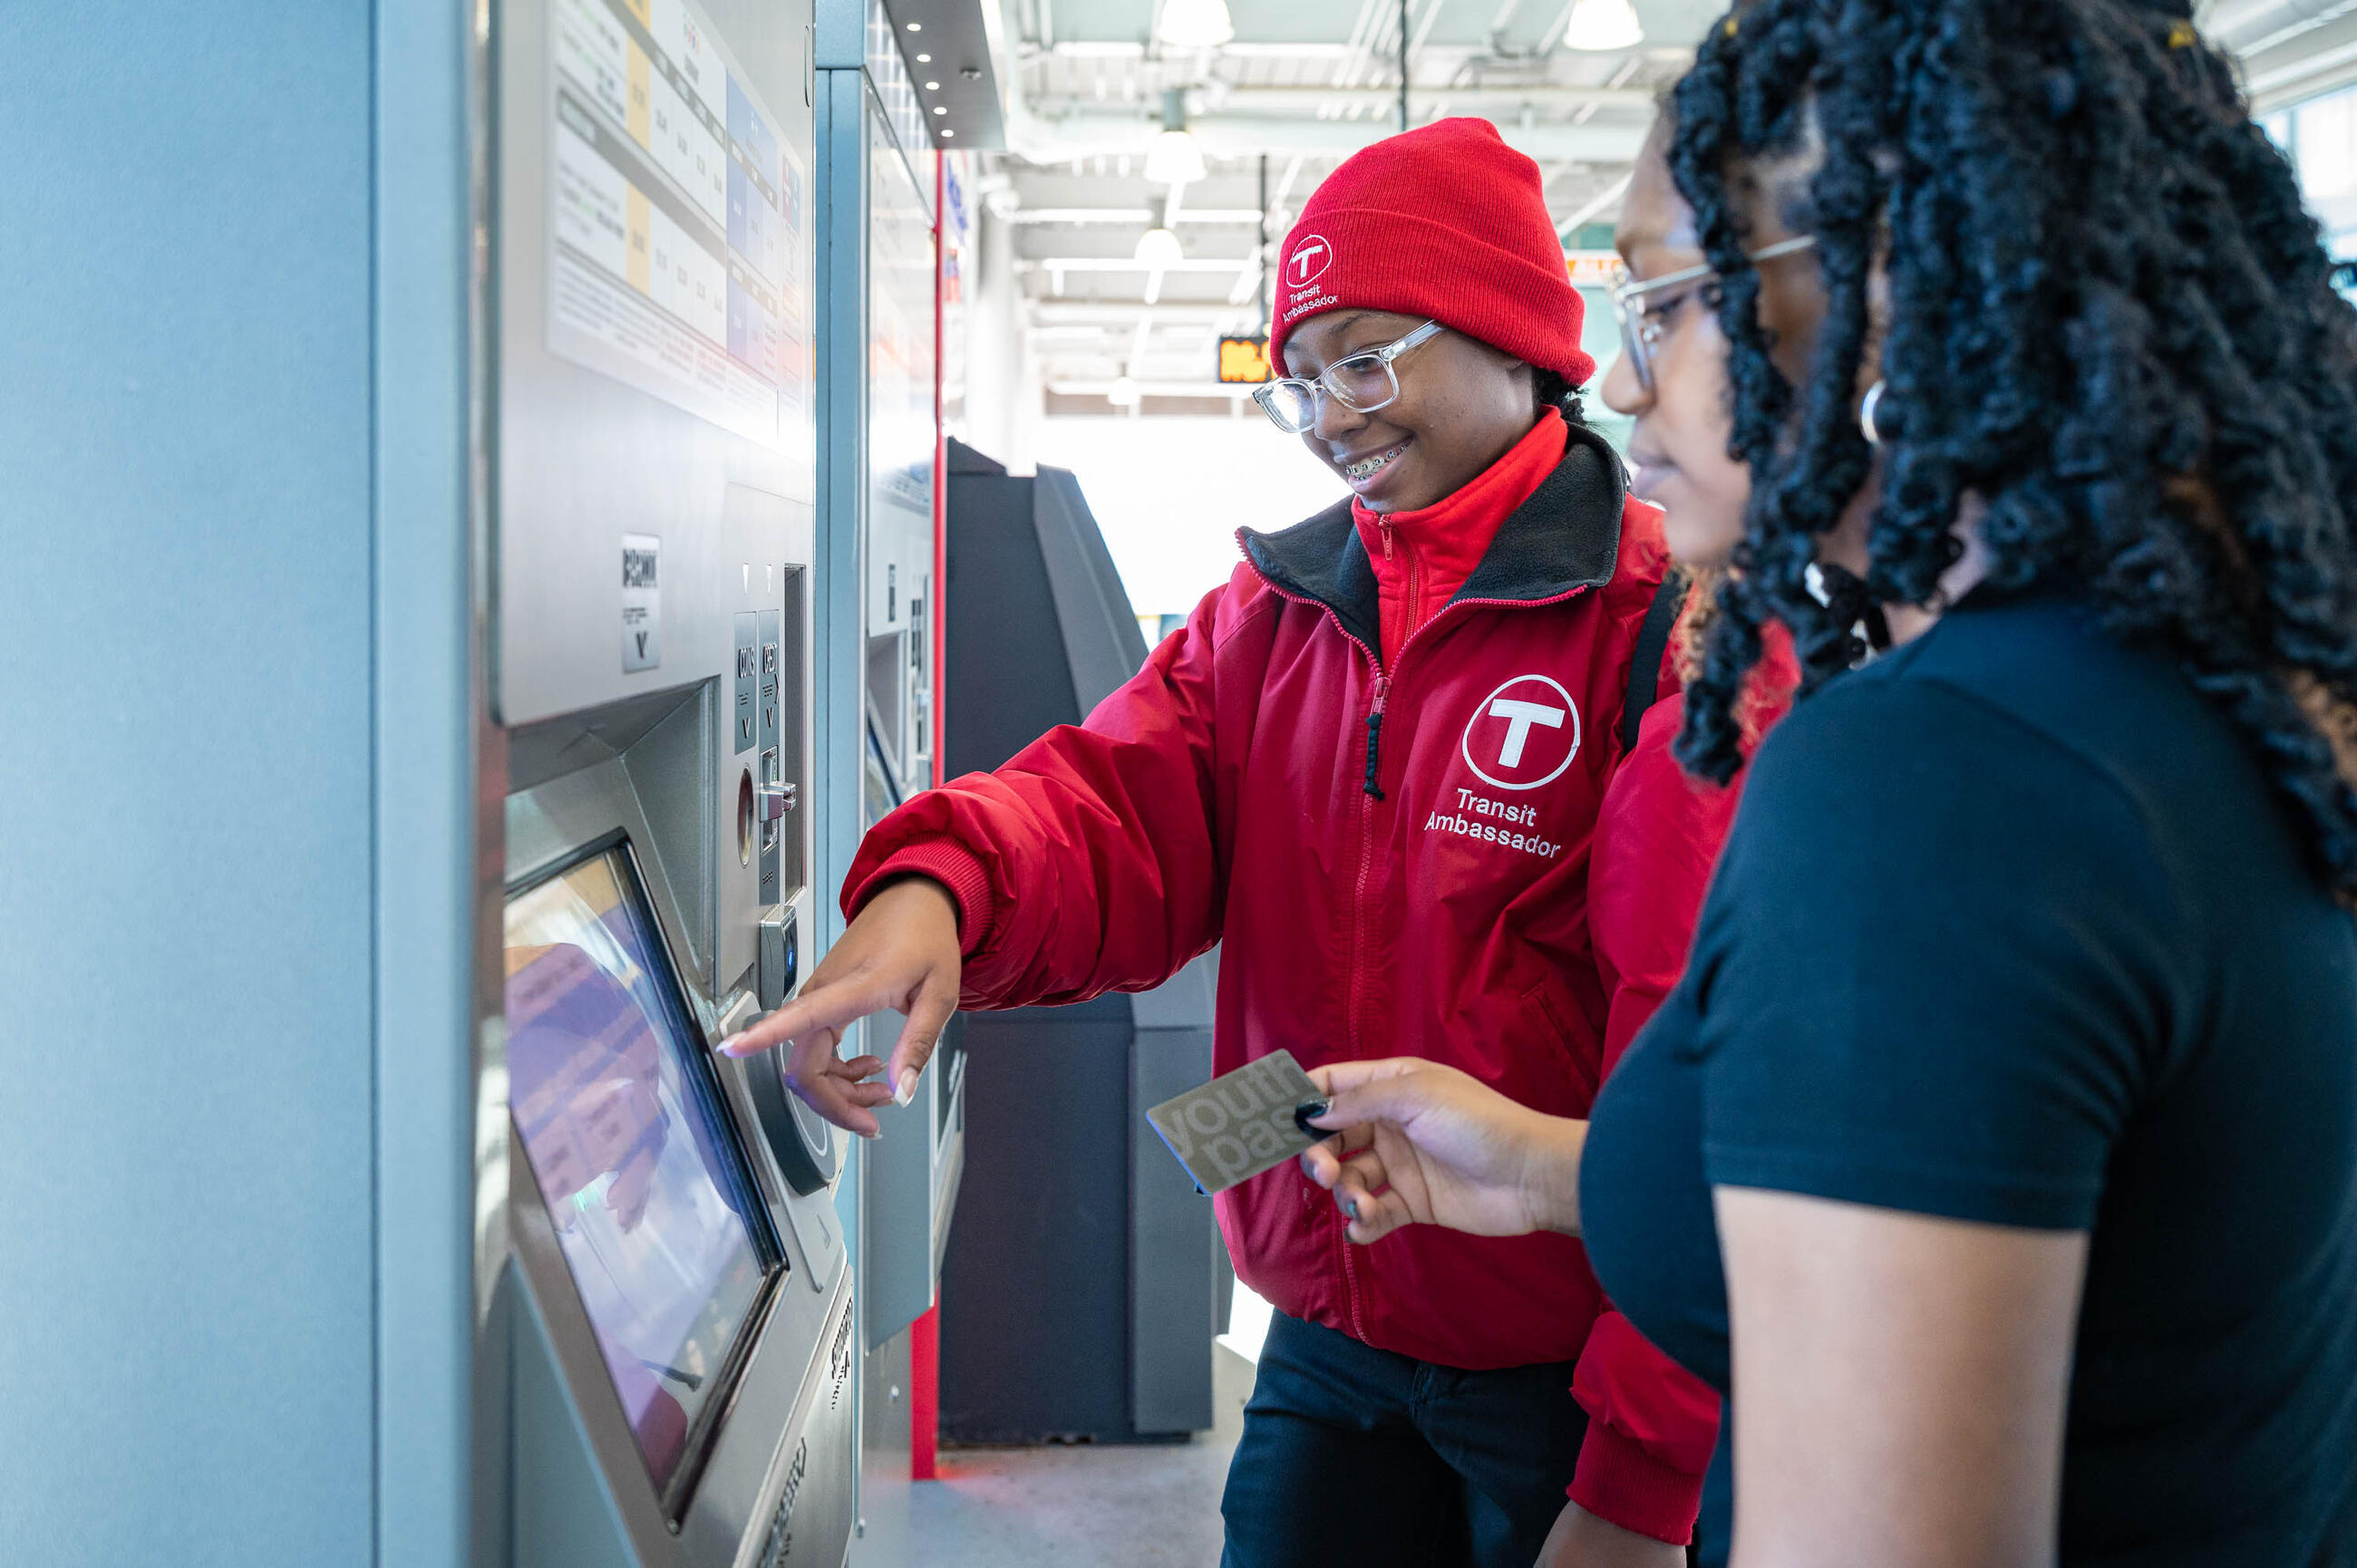 Transit Ambassador in red jacket pointing at fare vending machine with rider